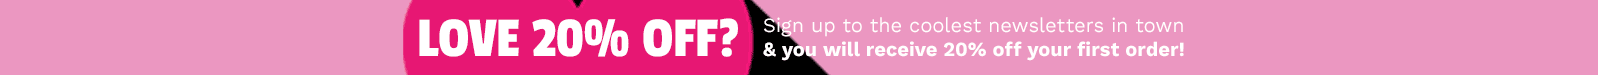 01-22 - NL SIgn Up